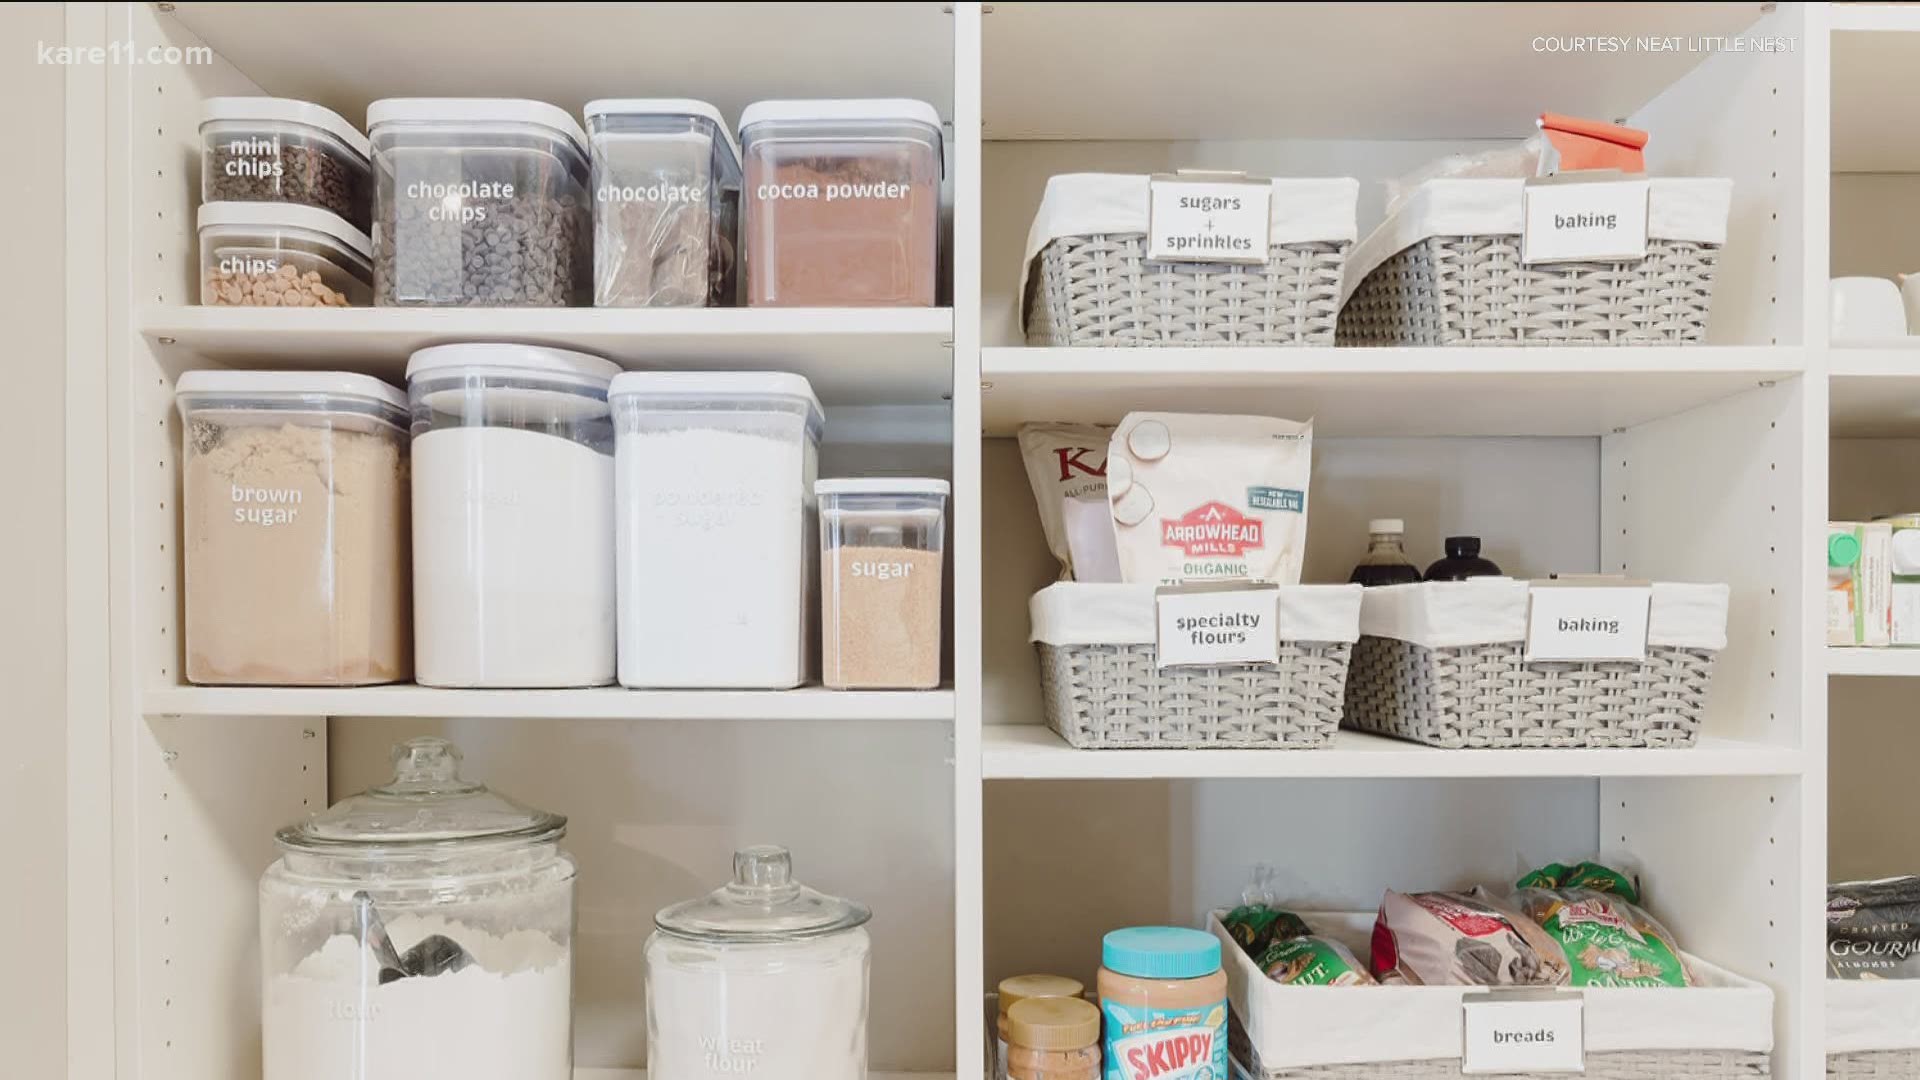 Tips from Neat Little Nest on how to organize your pantry for spring.